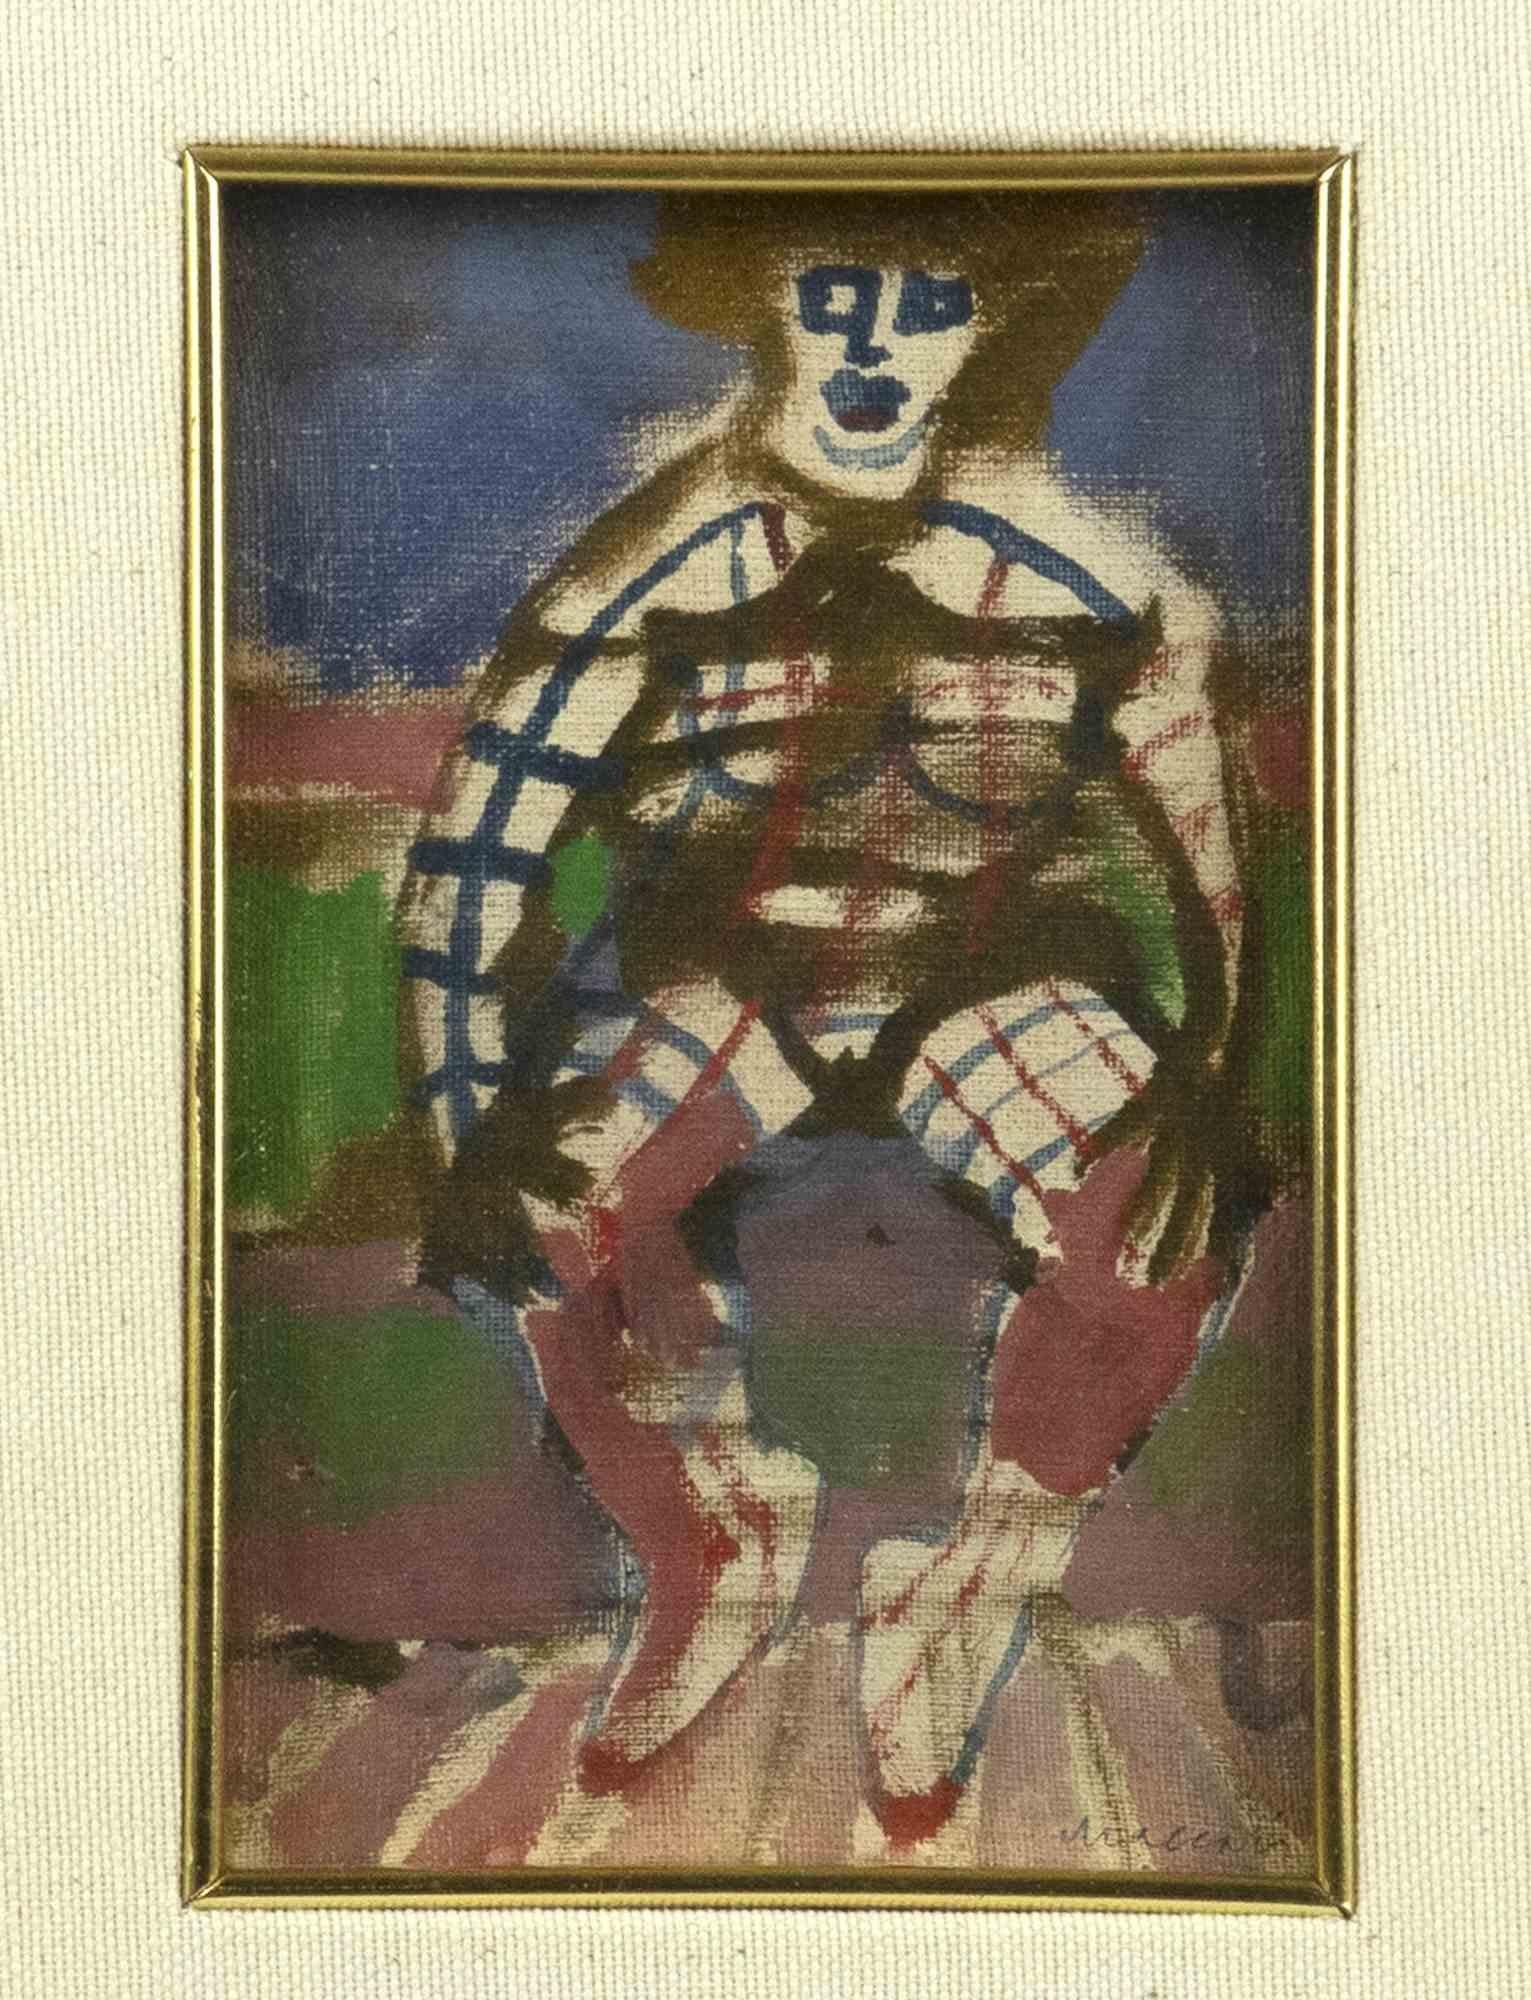 Woman is an original artwork realized by the Italian artist Mino Maccari in 1975.

Mixed media tempera on board. Hand-signed by the artist on the lower right corner. In good conditions.

Includes frame: 41 x 3 x 33 cm

Mino Maccari was an Italian